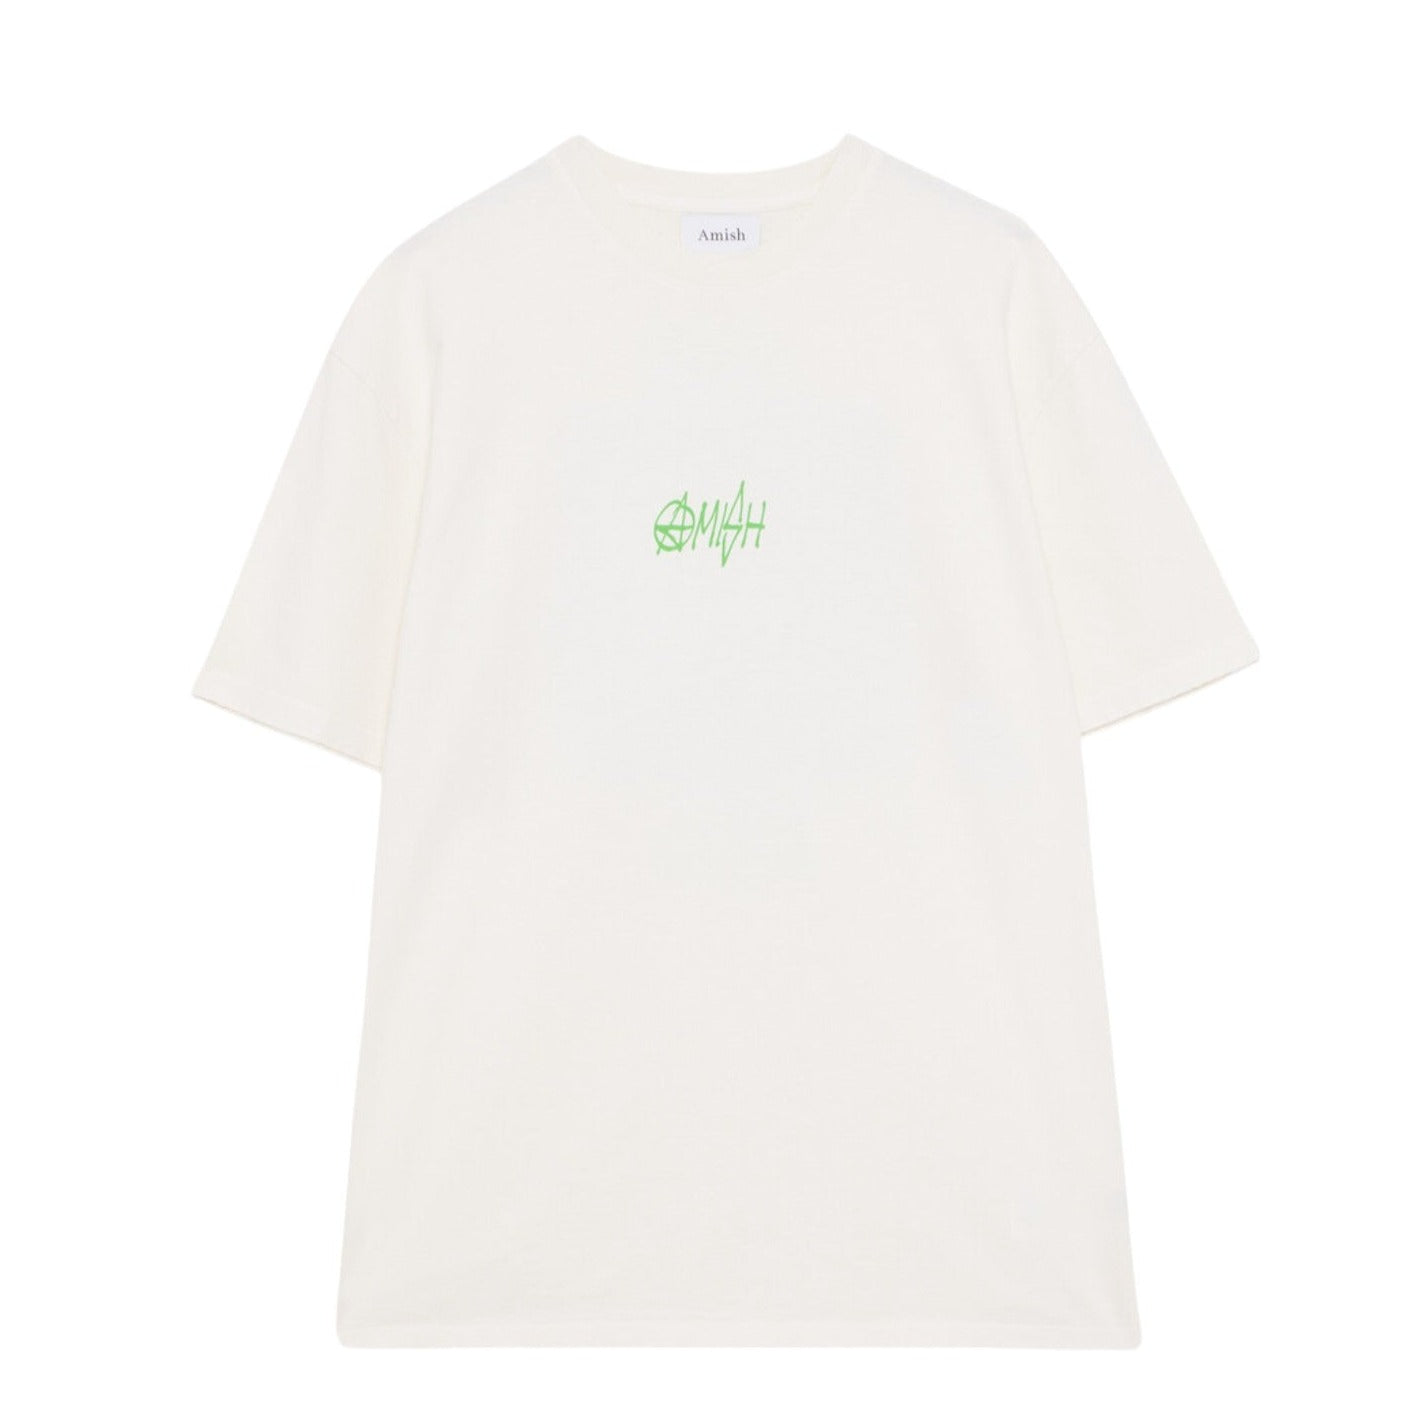 T-shirt Uomo oversize Amish Good music MAN AMISH Jersey Real Vintage Off White Bianco - Francis Concept